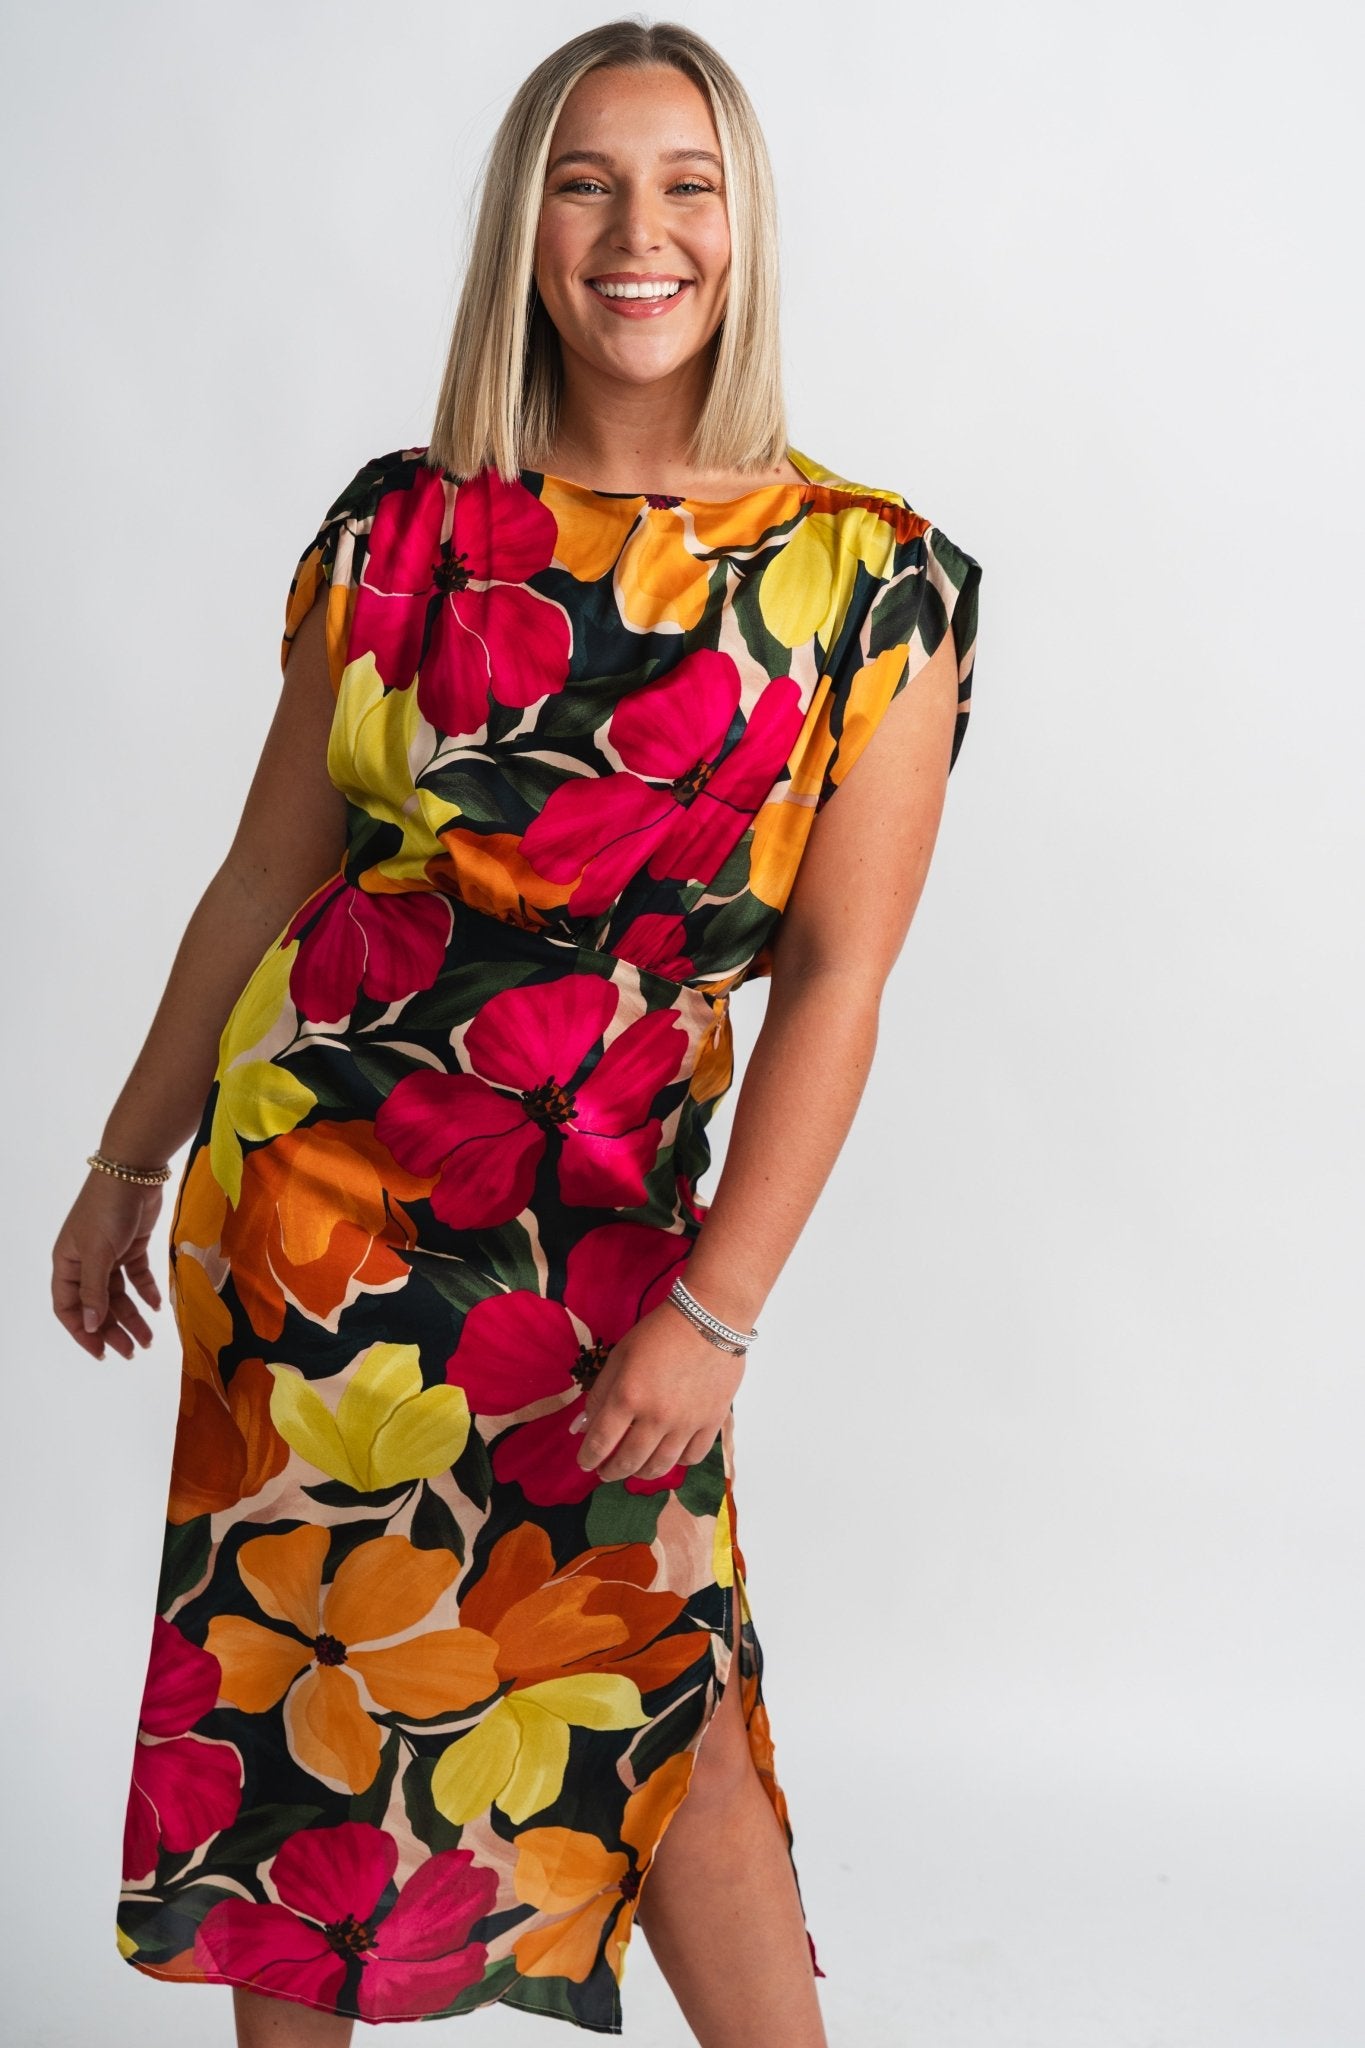 Tropical floral maxi dress fuchsia floral - Stylish dress - Trendy Staycation Outfits at Lush Fashion Lounge Boutique in Oklahoma City